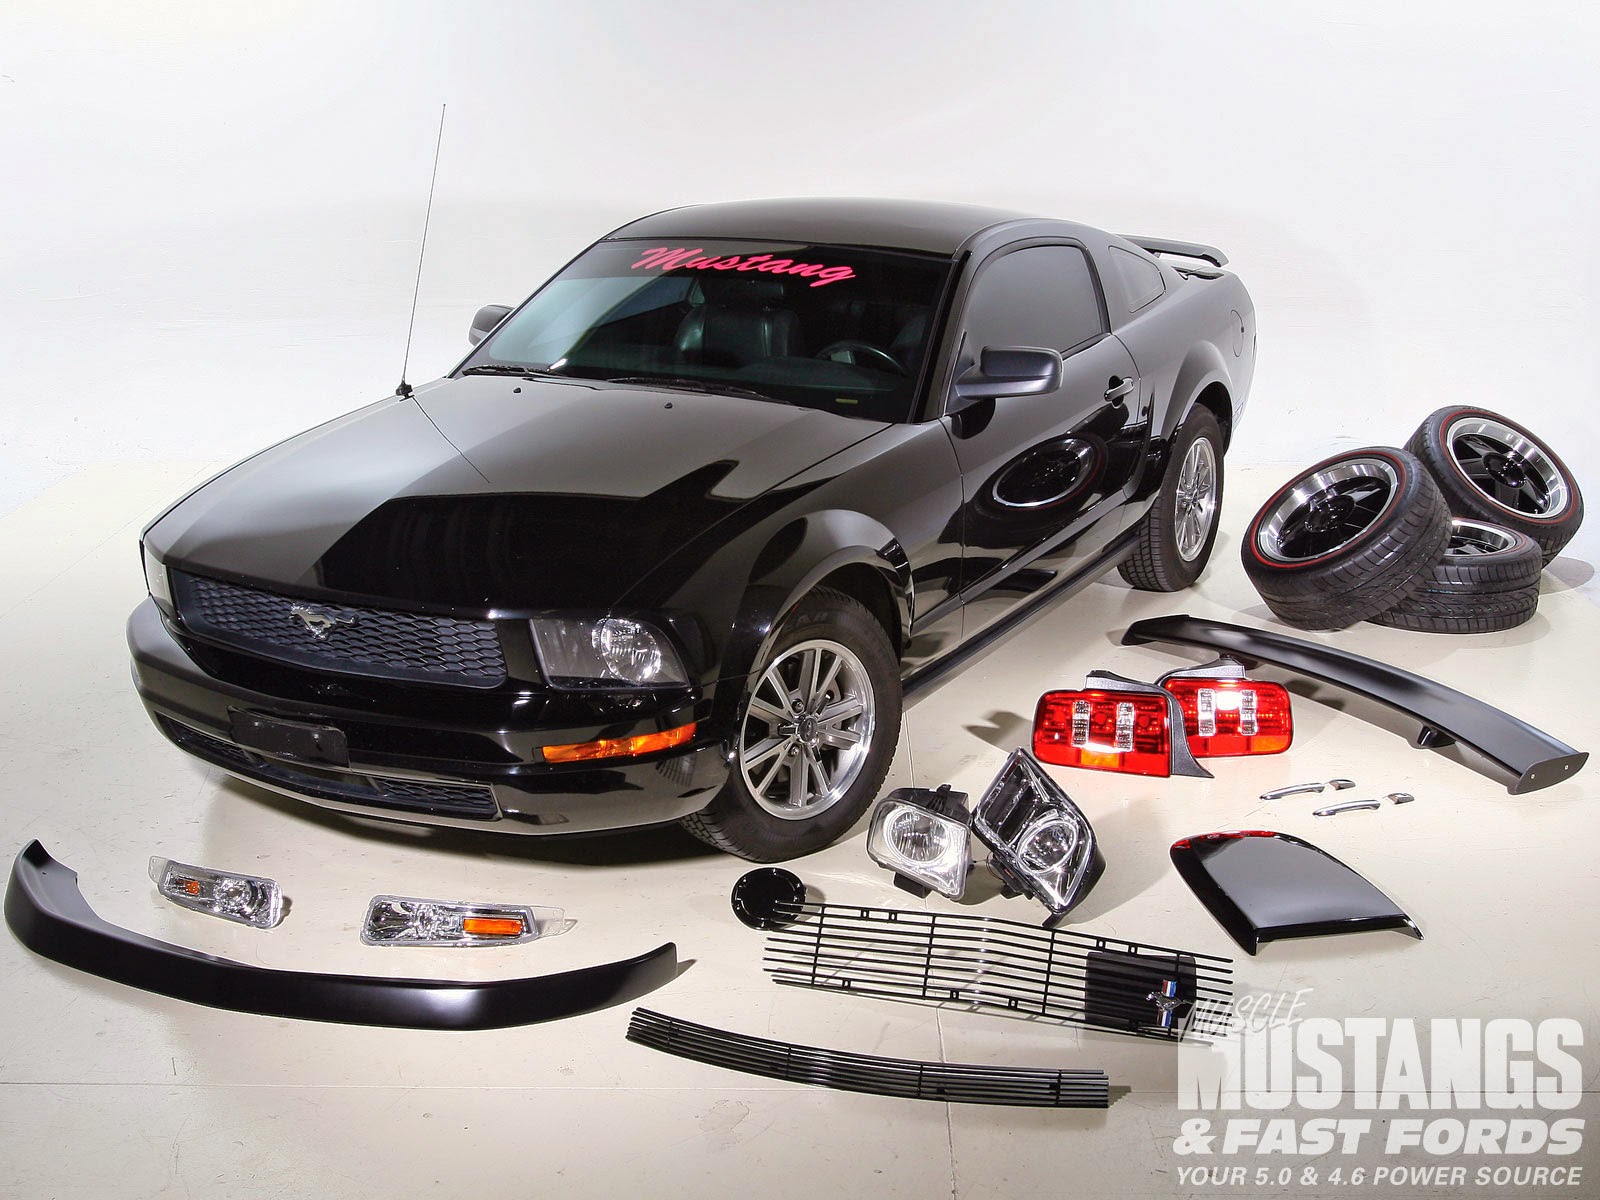 Ford Mustang Part And Accessories